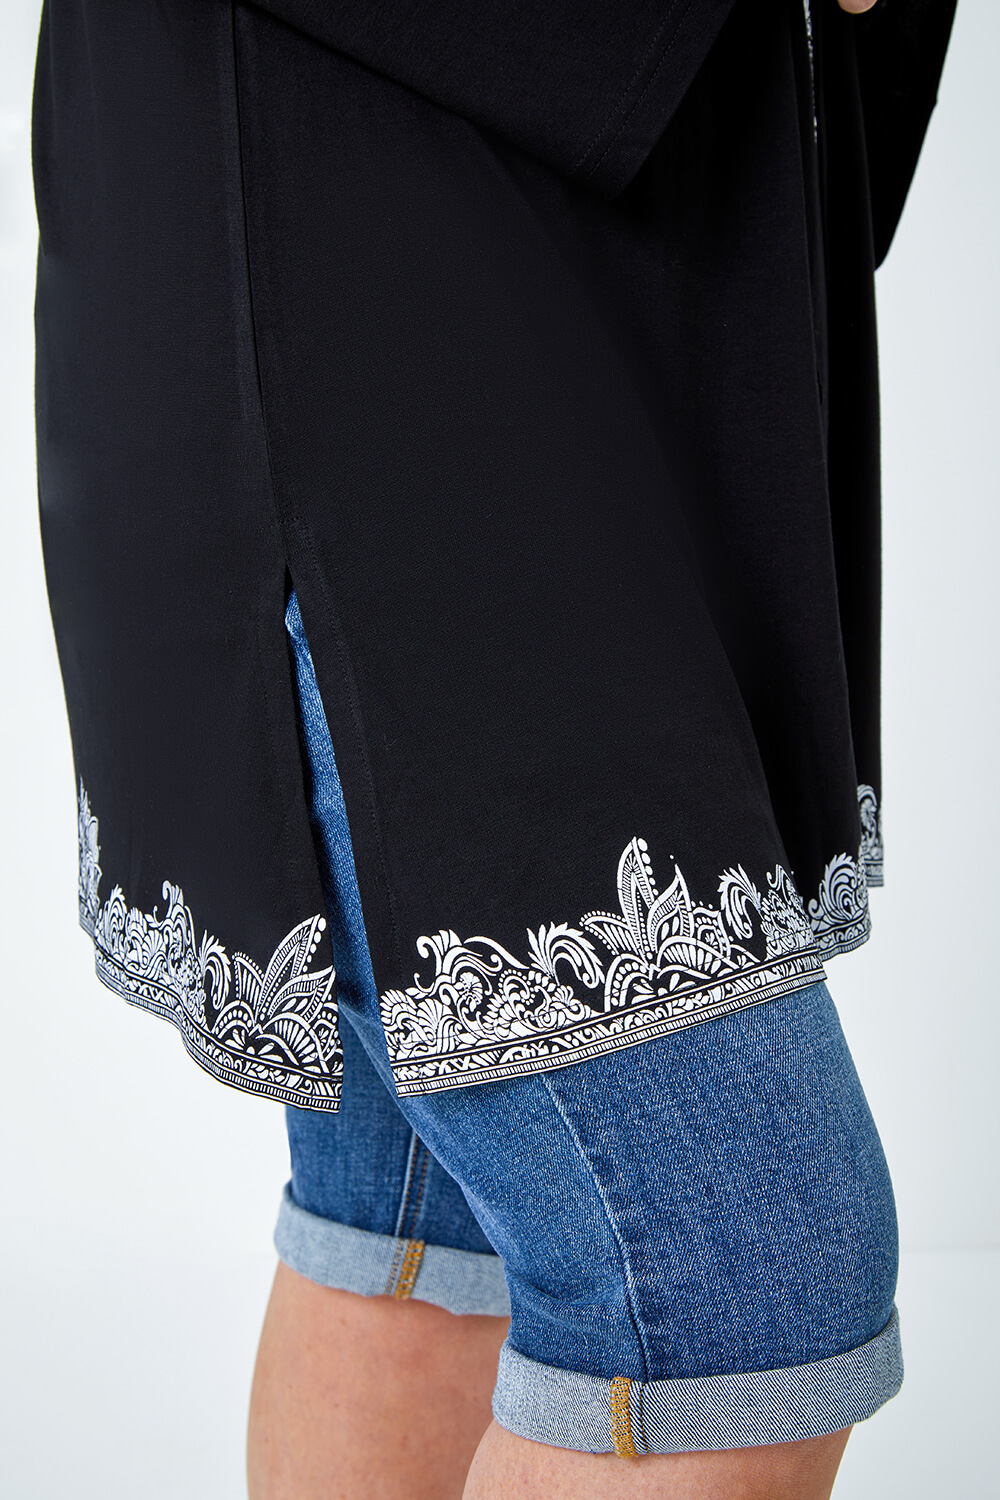 Black Curve Border Print Lace Up Top, Image 5 of 5